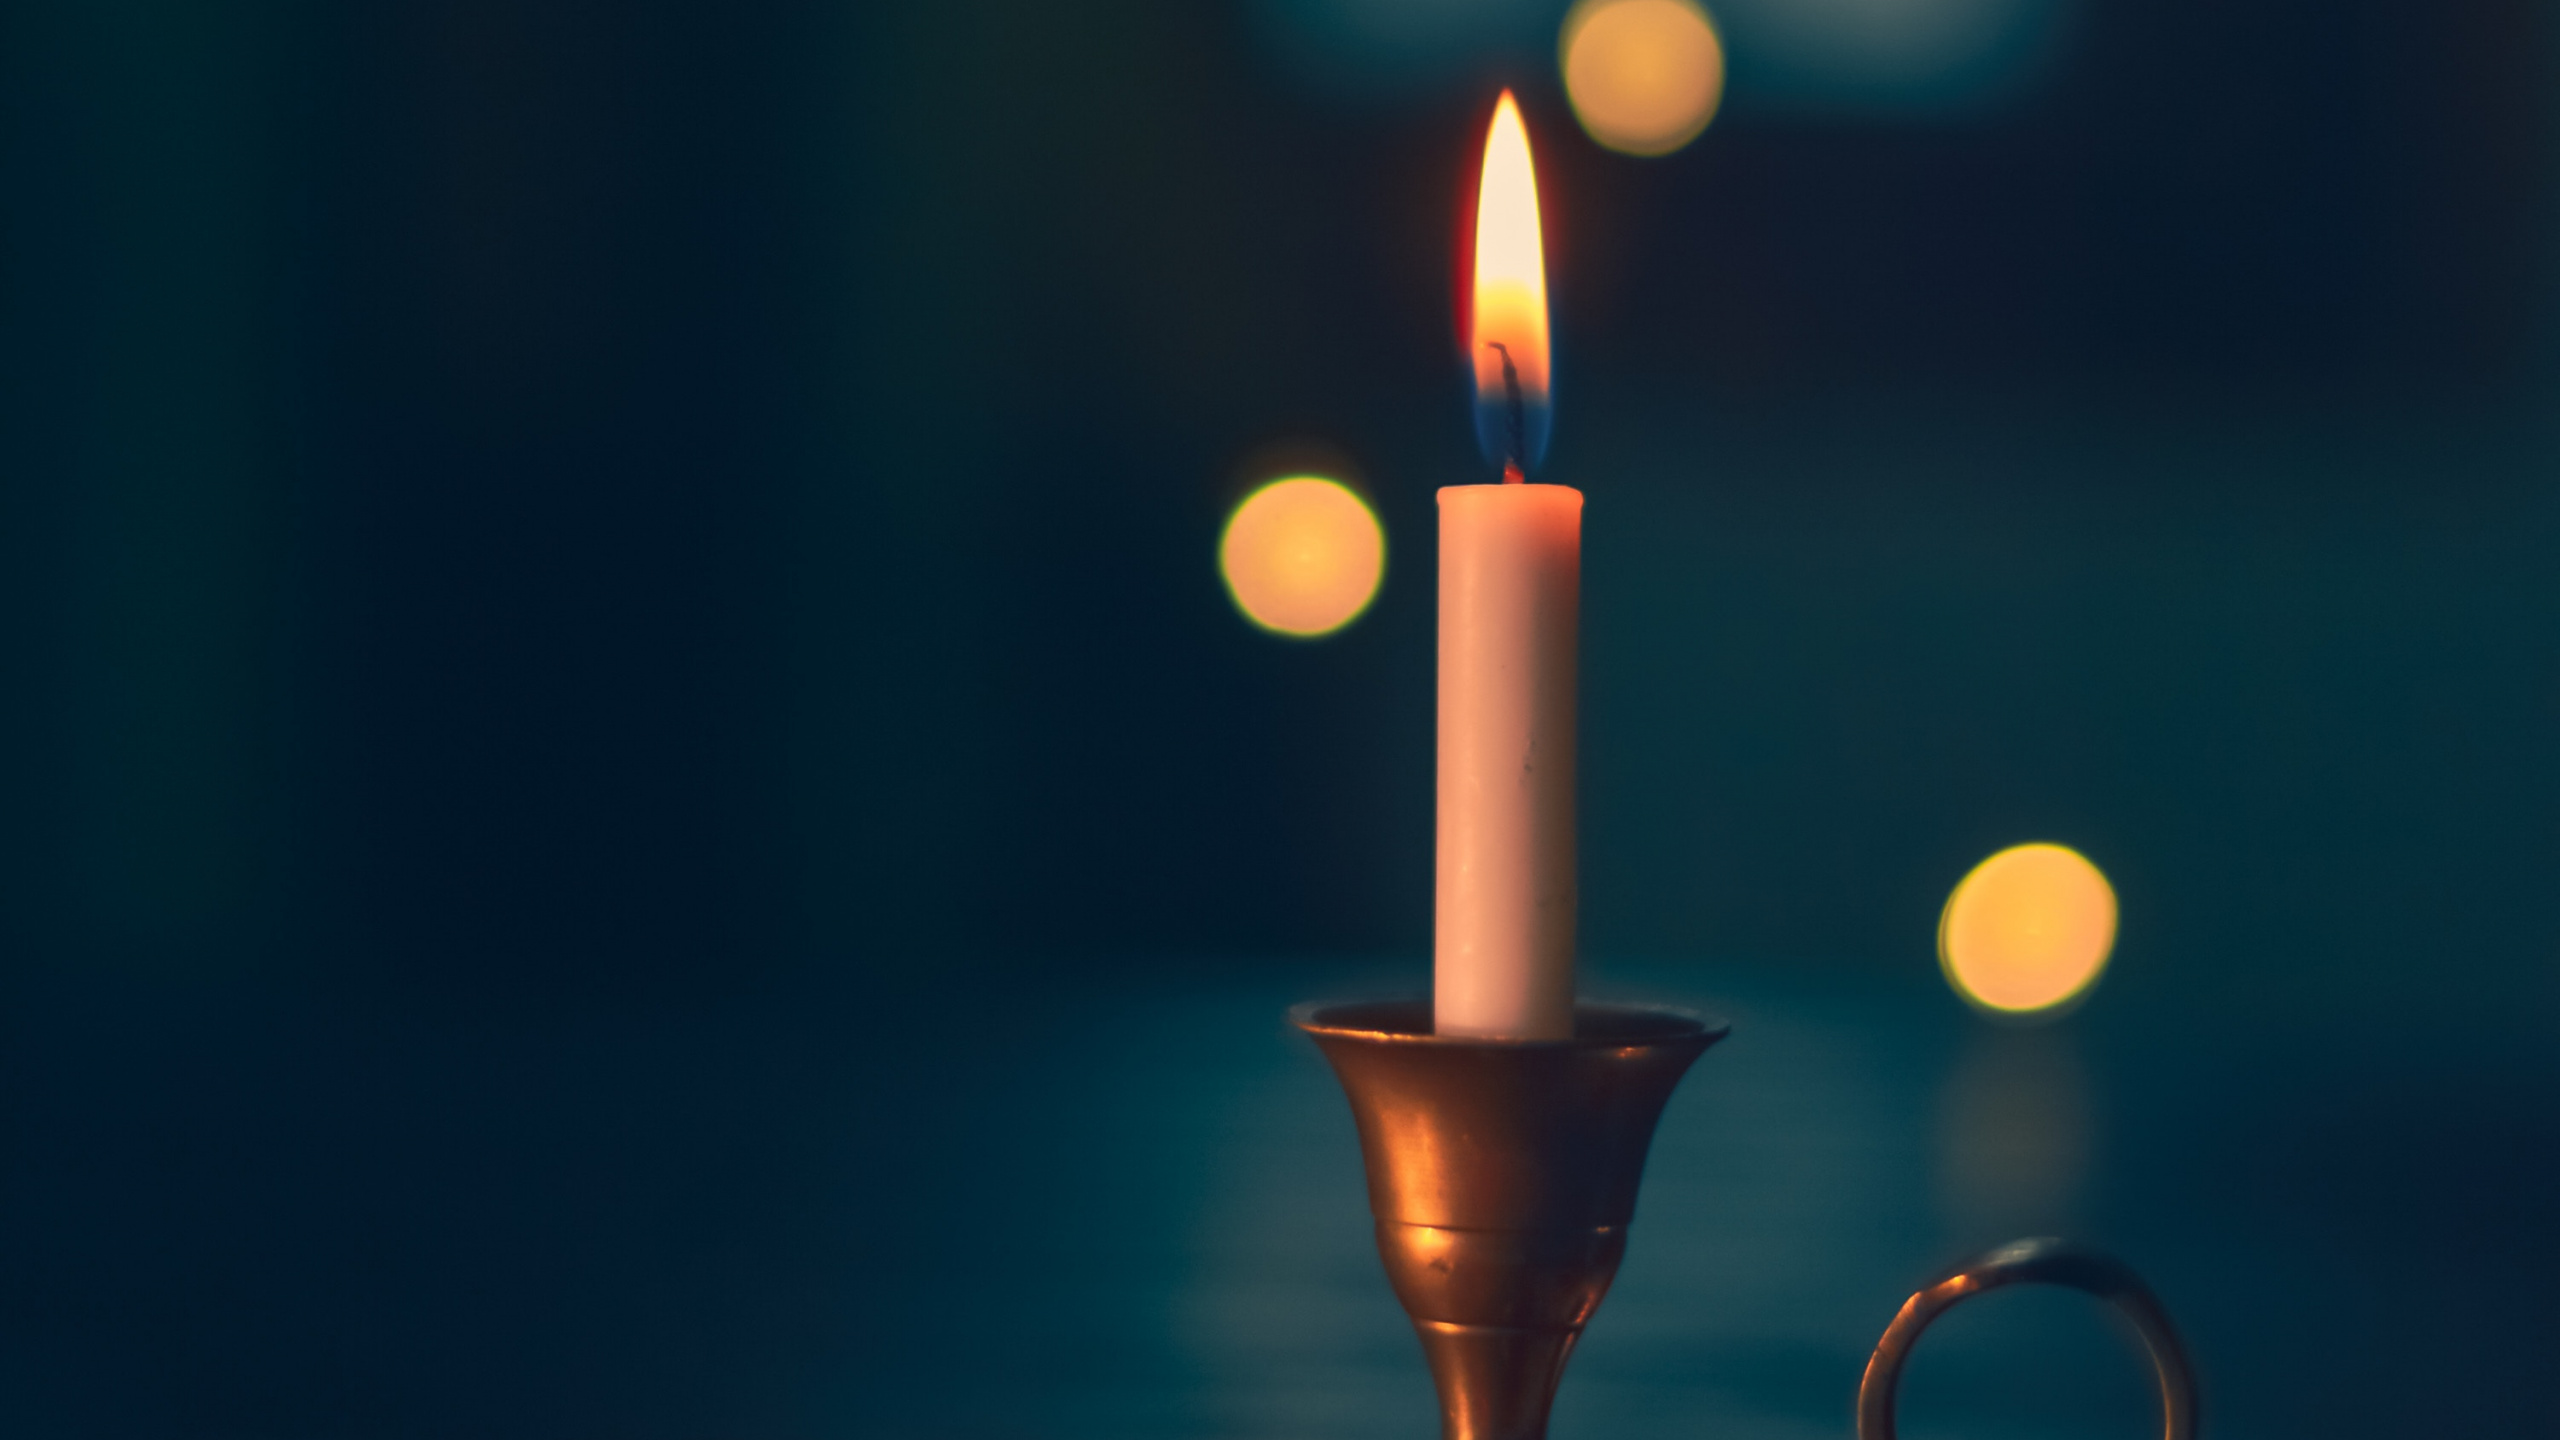 Lighted Candle in Black Holder. Wallpaper in 2560x1440 Resolution